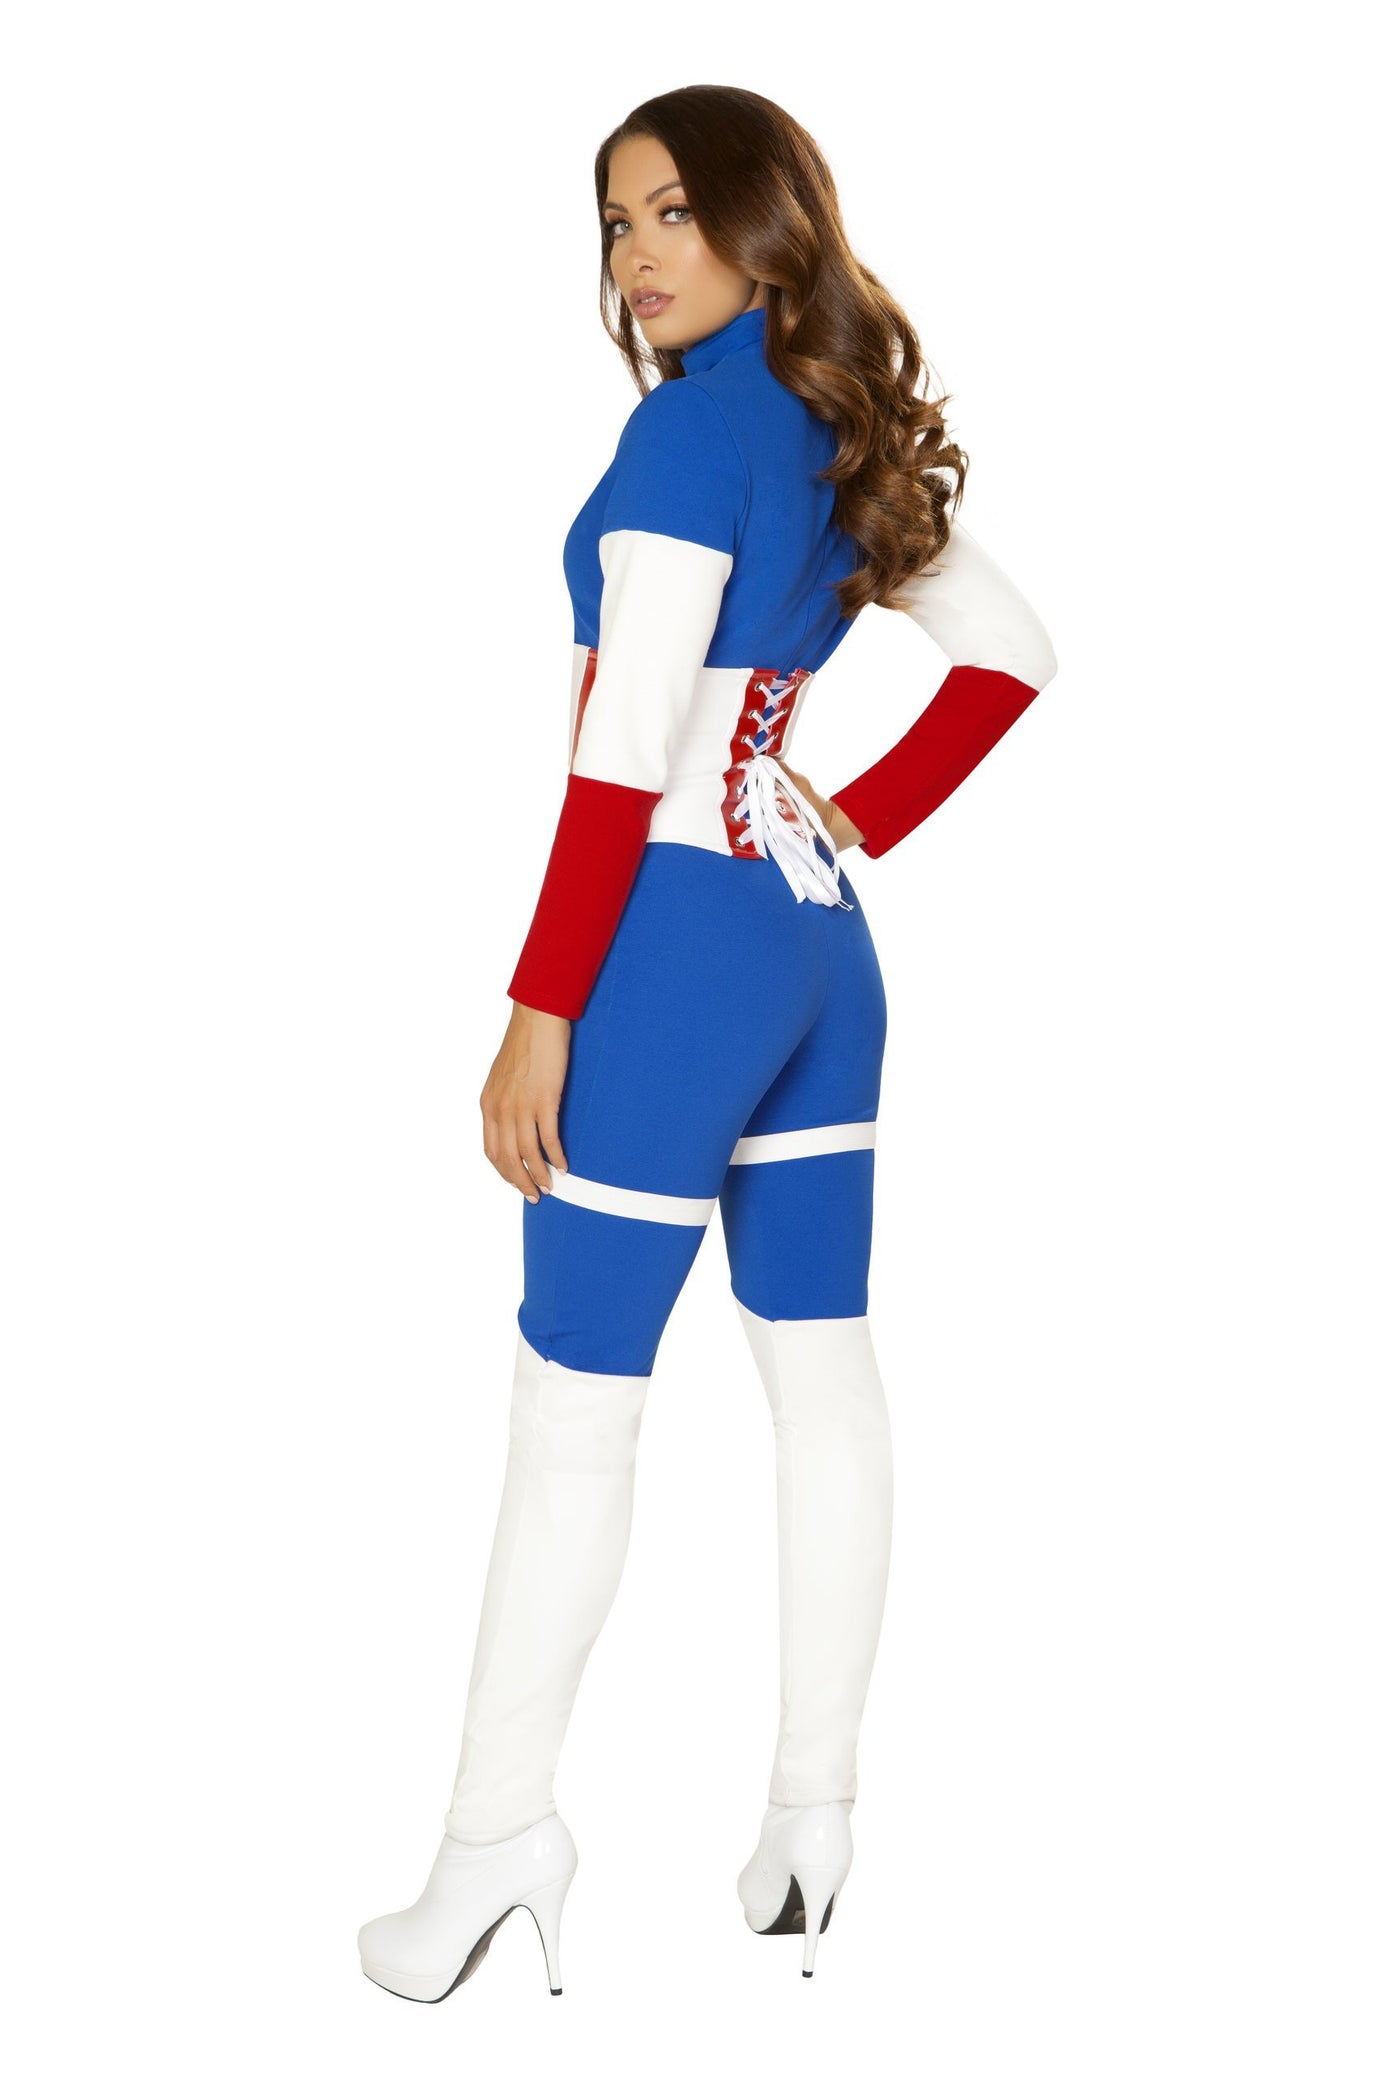 Buy 2pc American Commander from RomaRetailShop for 69.99 with Same Day Shipping Designed by Roma Costume 4852-AS-S